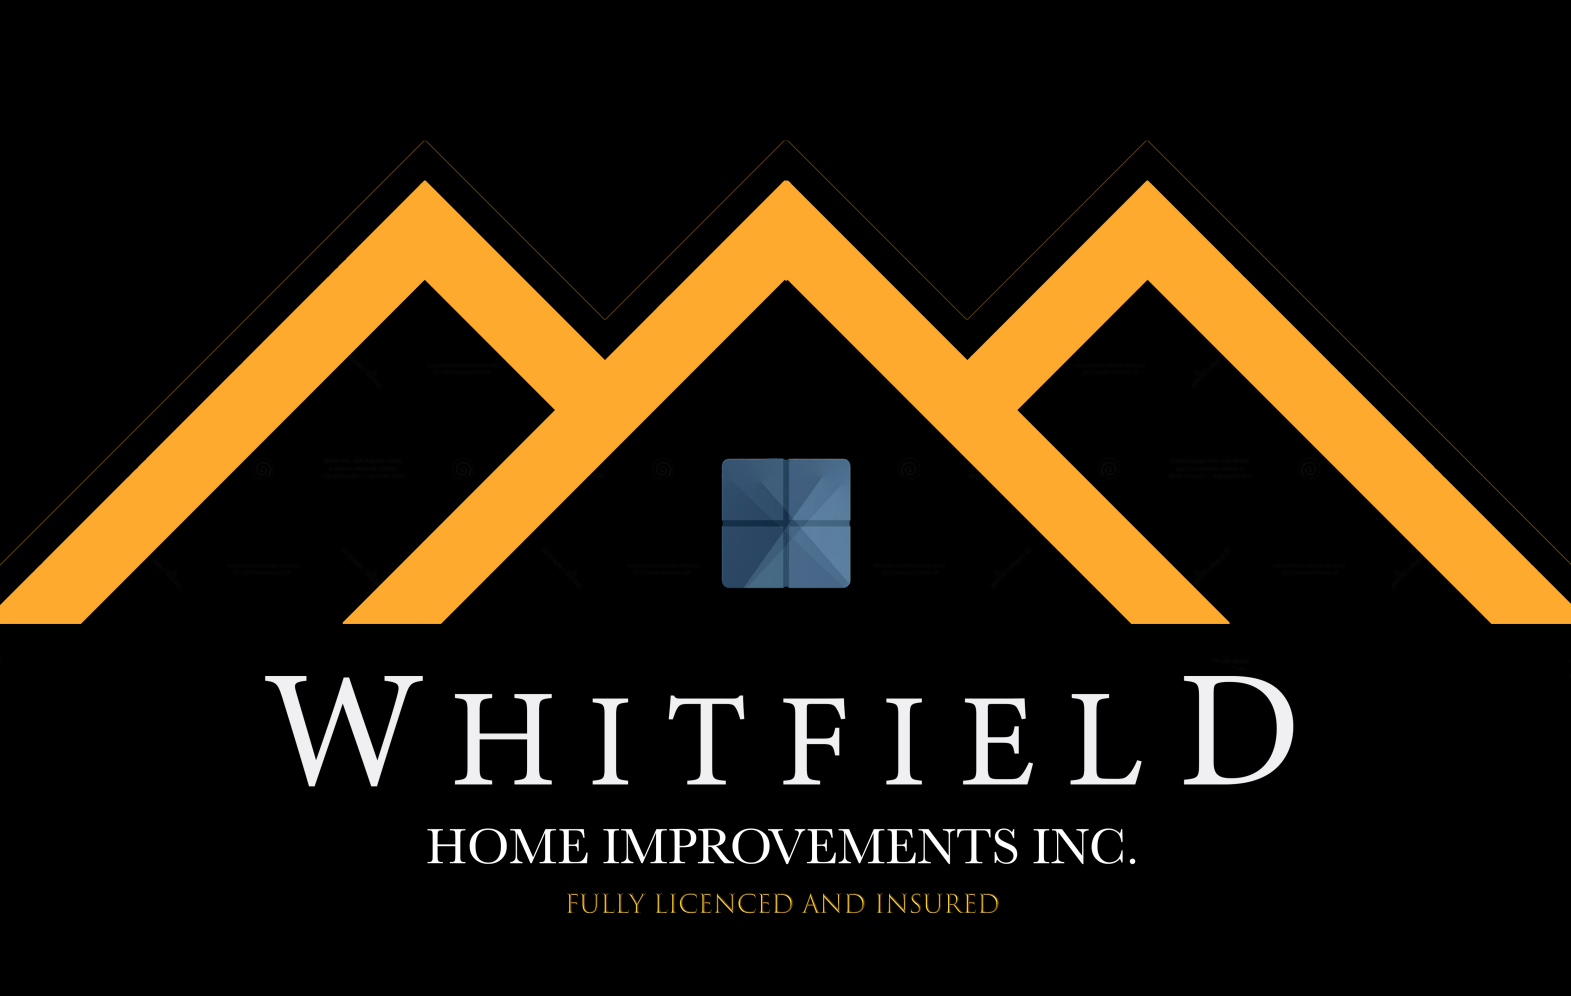 Whitfield Home Improvements Inc